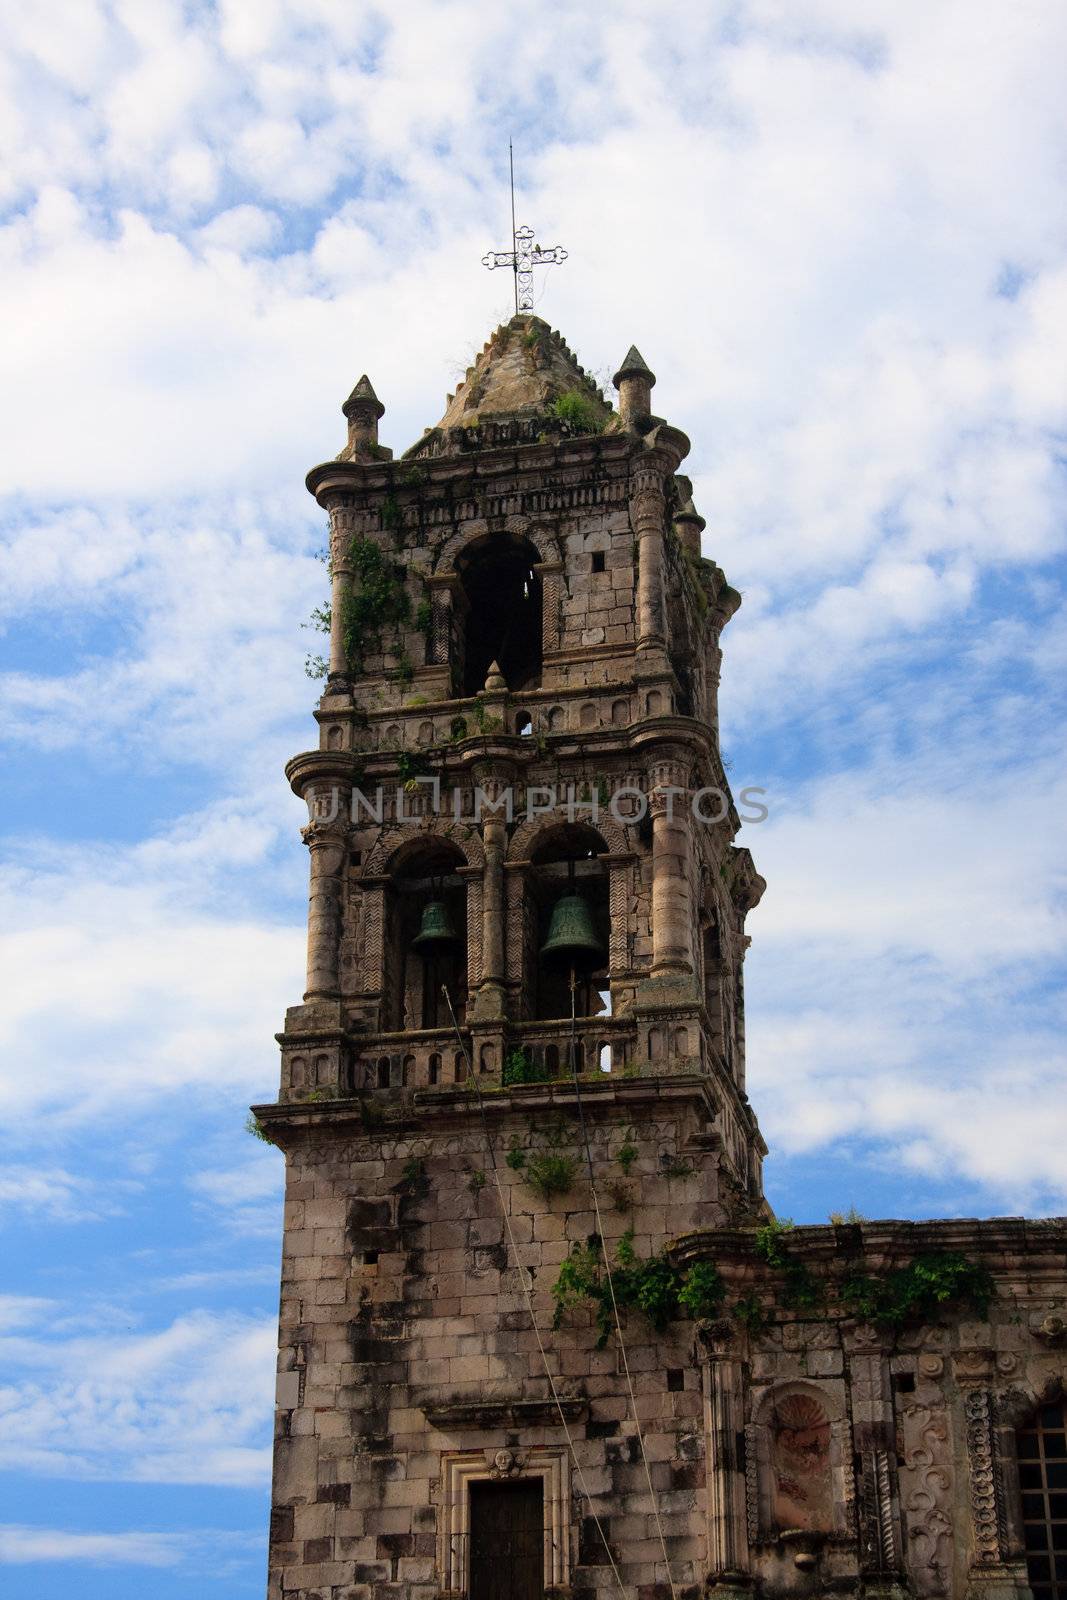 Close up of the tower of Kopala church in Mexico